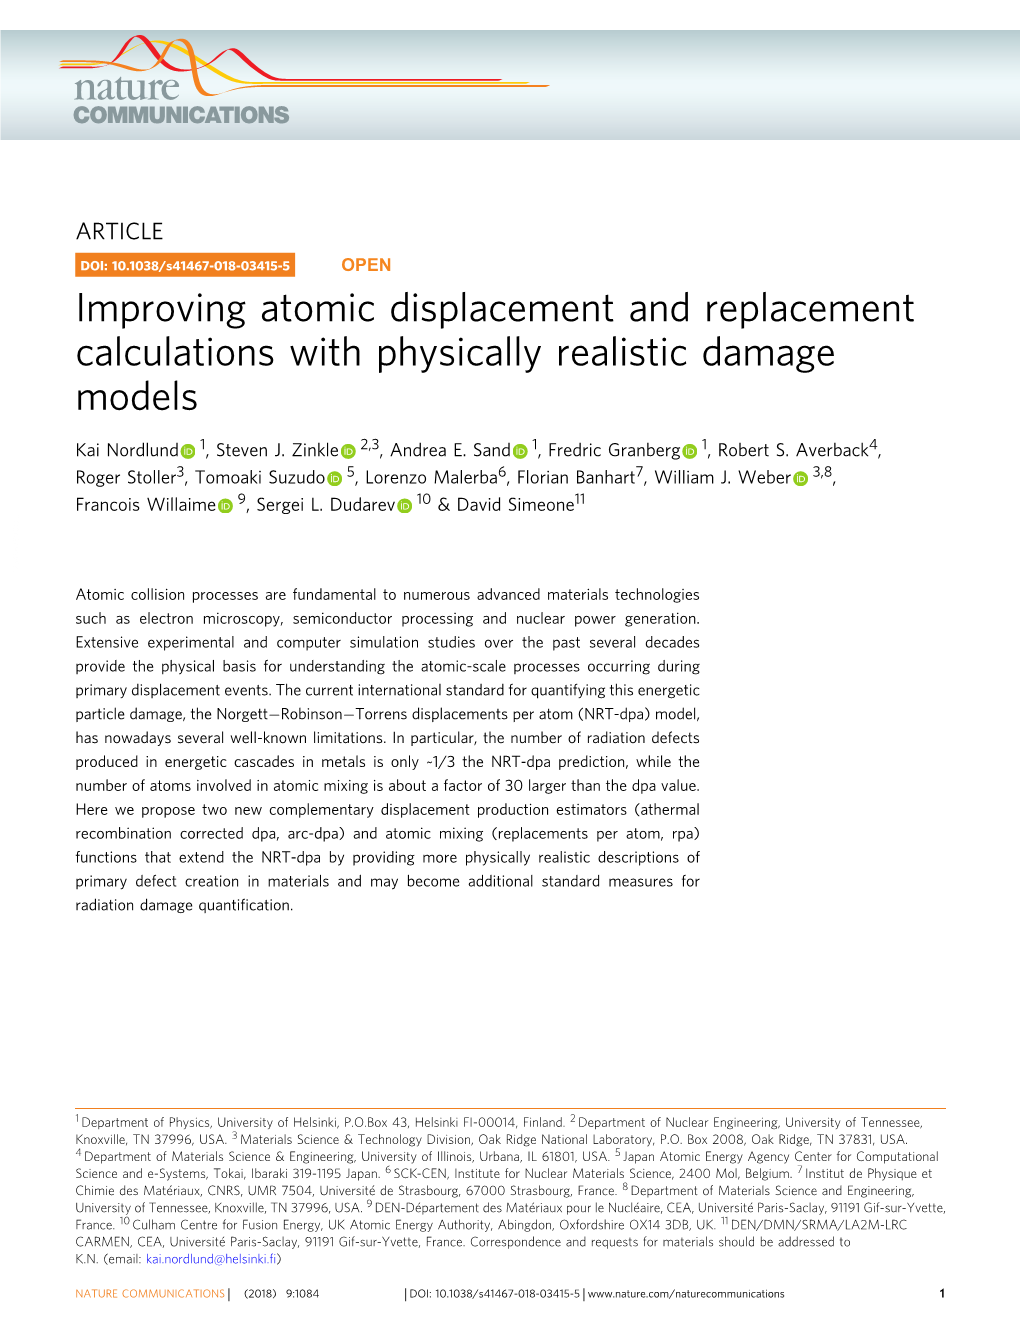 S41467-018-03415-5 OPEN Improving Atomic Displacement and Replacement Calculations with Physically Realistic Damage Models